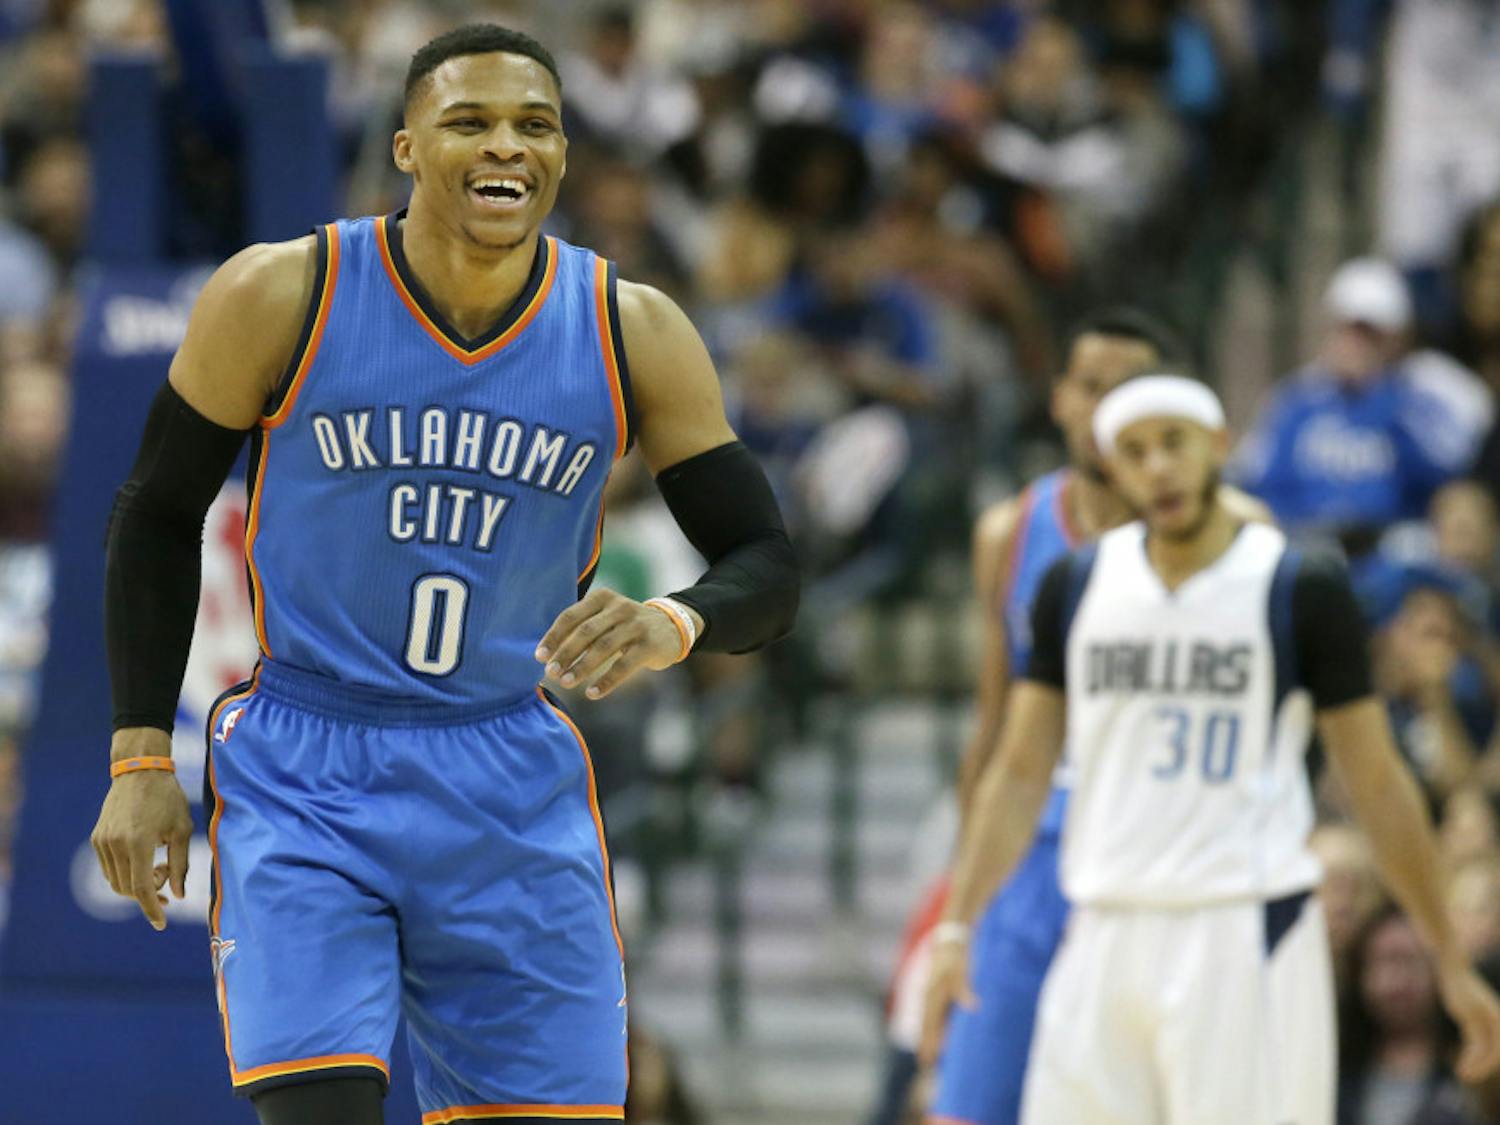 FILE - In this March 5, 2017, file photo, Oklahoma City Thunder guard Russell Westbrook (0) smiles on the court during the second half of an NBA basketball game against the Dallas Mavericks, in Dallas. Westbrook was once considered selfish and out of control. Now, he's harnessed his fury and competitive fire to become the ultimate teammate. (AP Photo/LM Otero, File)